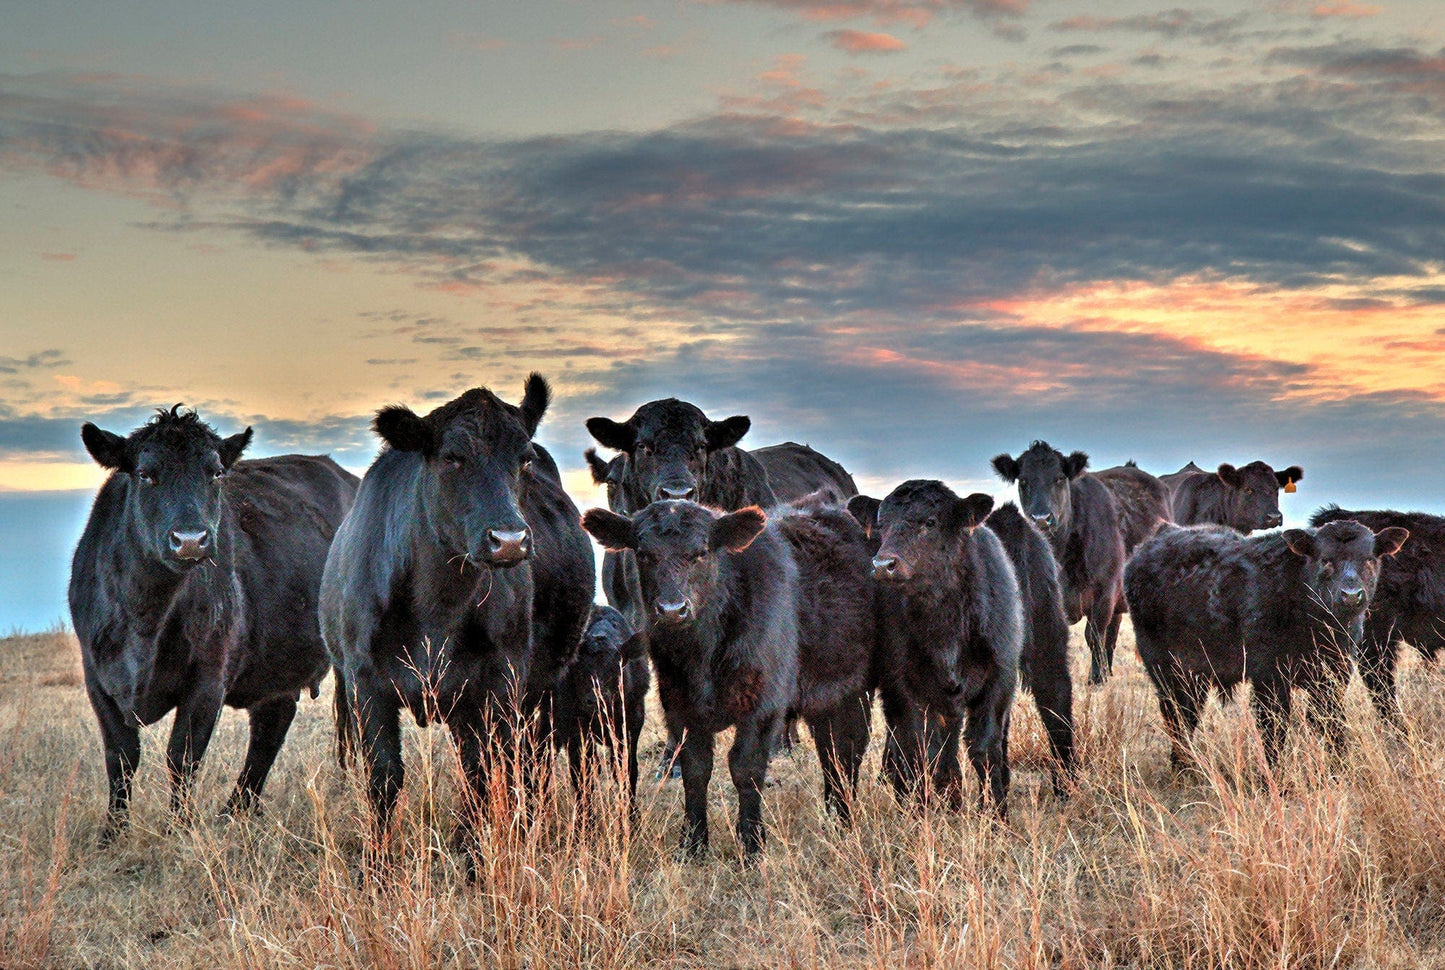 Black Angus Wall Art - Herd at Sunset Paper Photo Print / 12 x 18 Inches Wall Art Teri James Photography